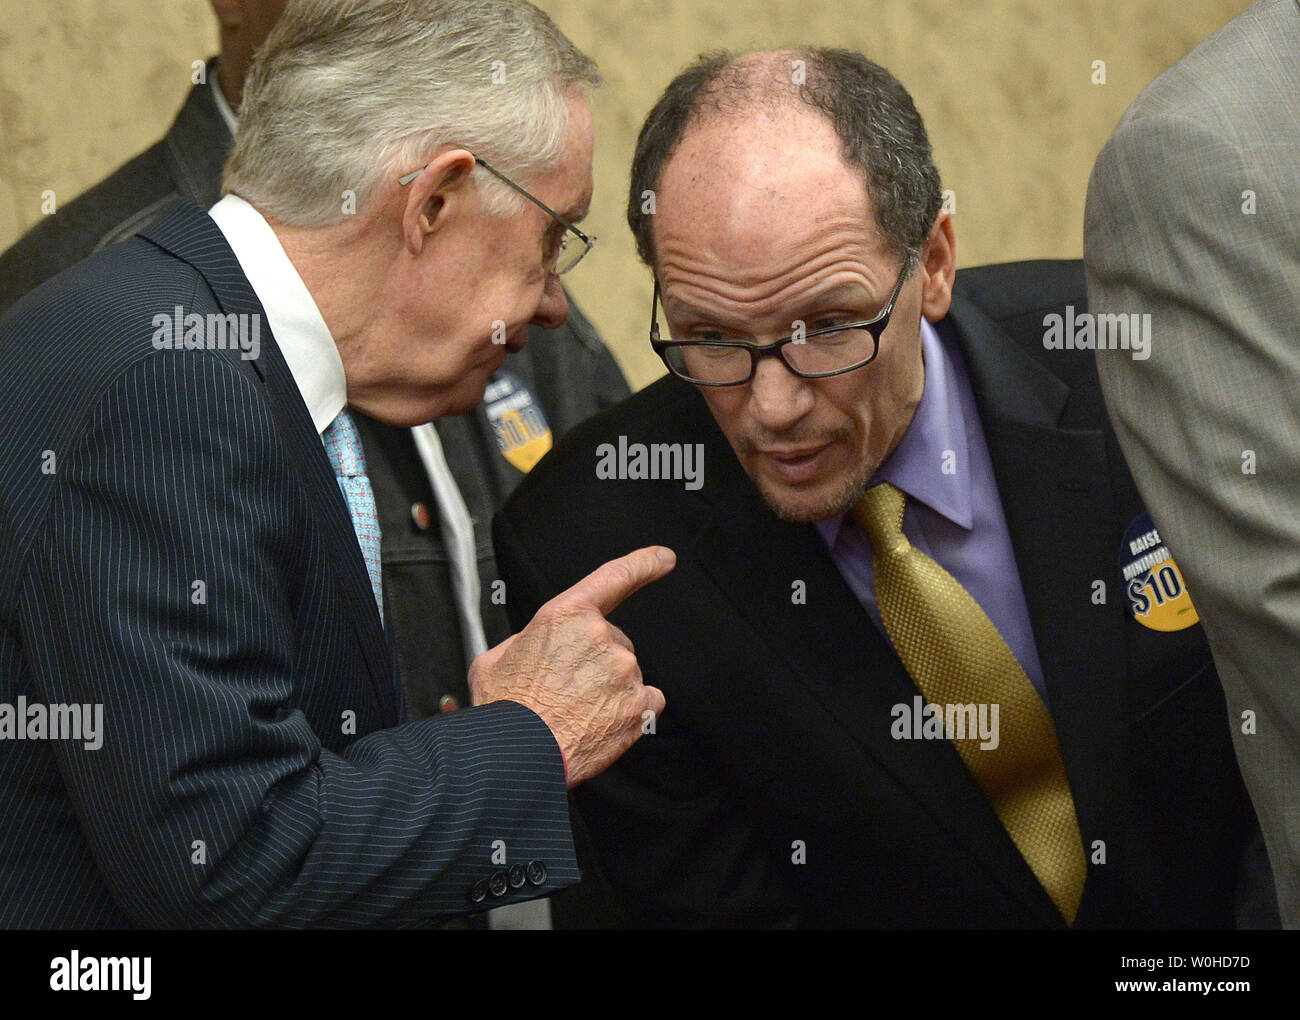 Senate Majority Leader Harry Reid, D-Nev,. talks to Labor Secretary Thomas Perez during a press conference on raising the minimum wage to $10.10 per hour, on Capitol Hill in Washington, D.C. on April 3, 2014. UPI/Kevin Dietsch Stock Photo